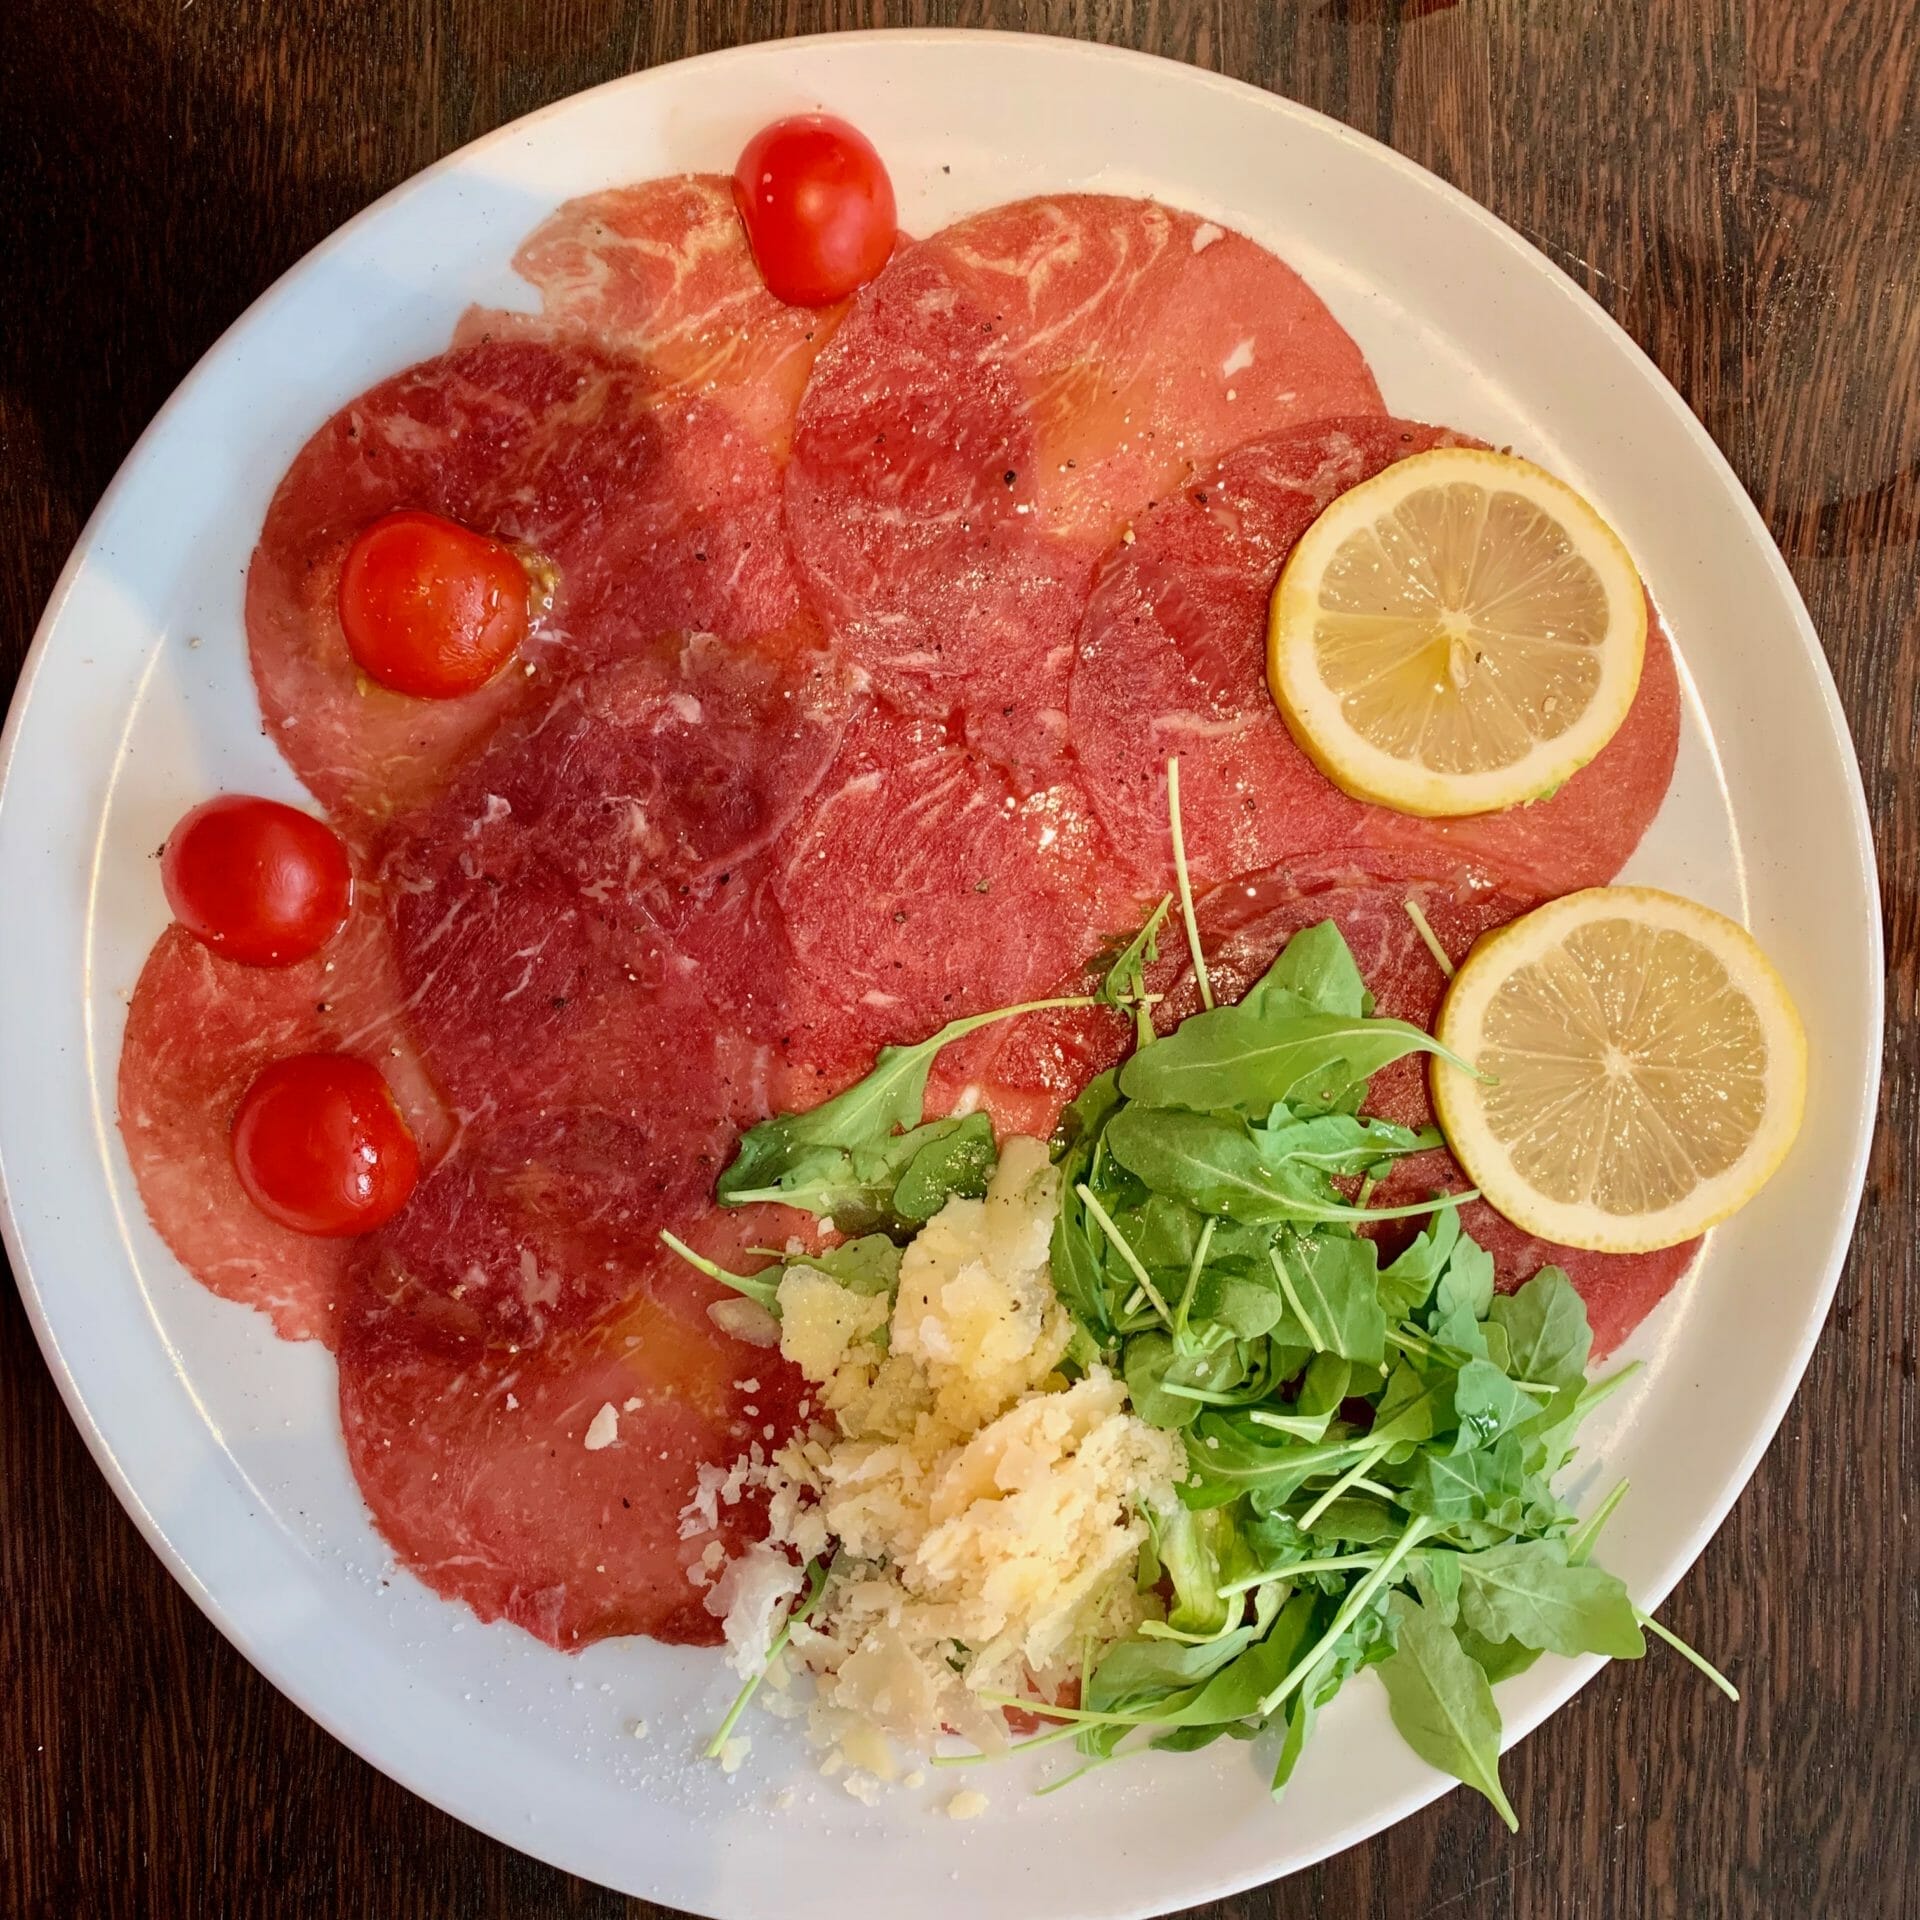 Beef carpaccio with tomatoes, parmesan and lettuce